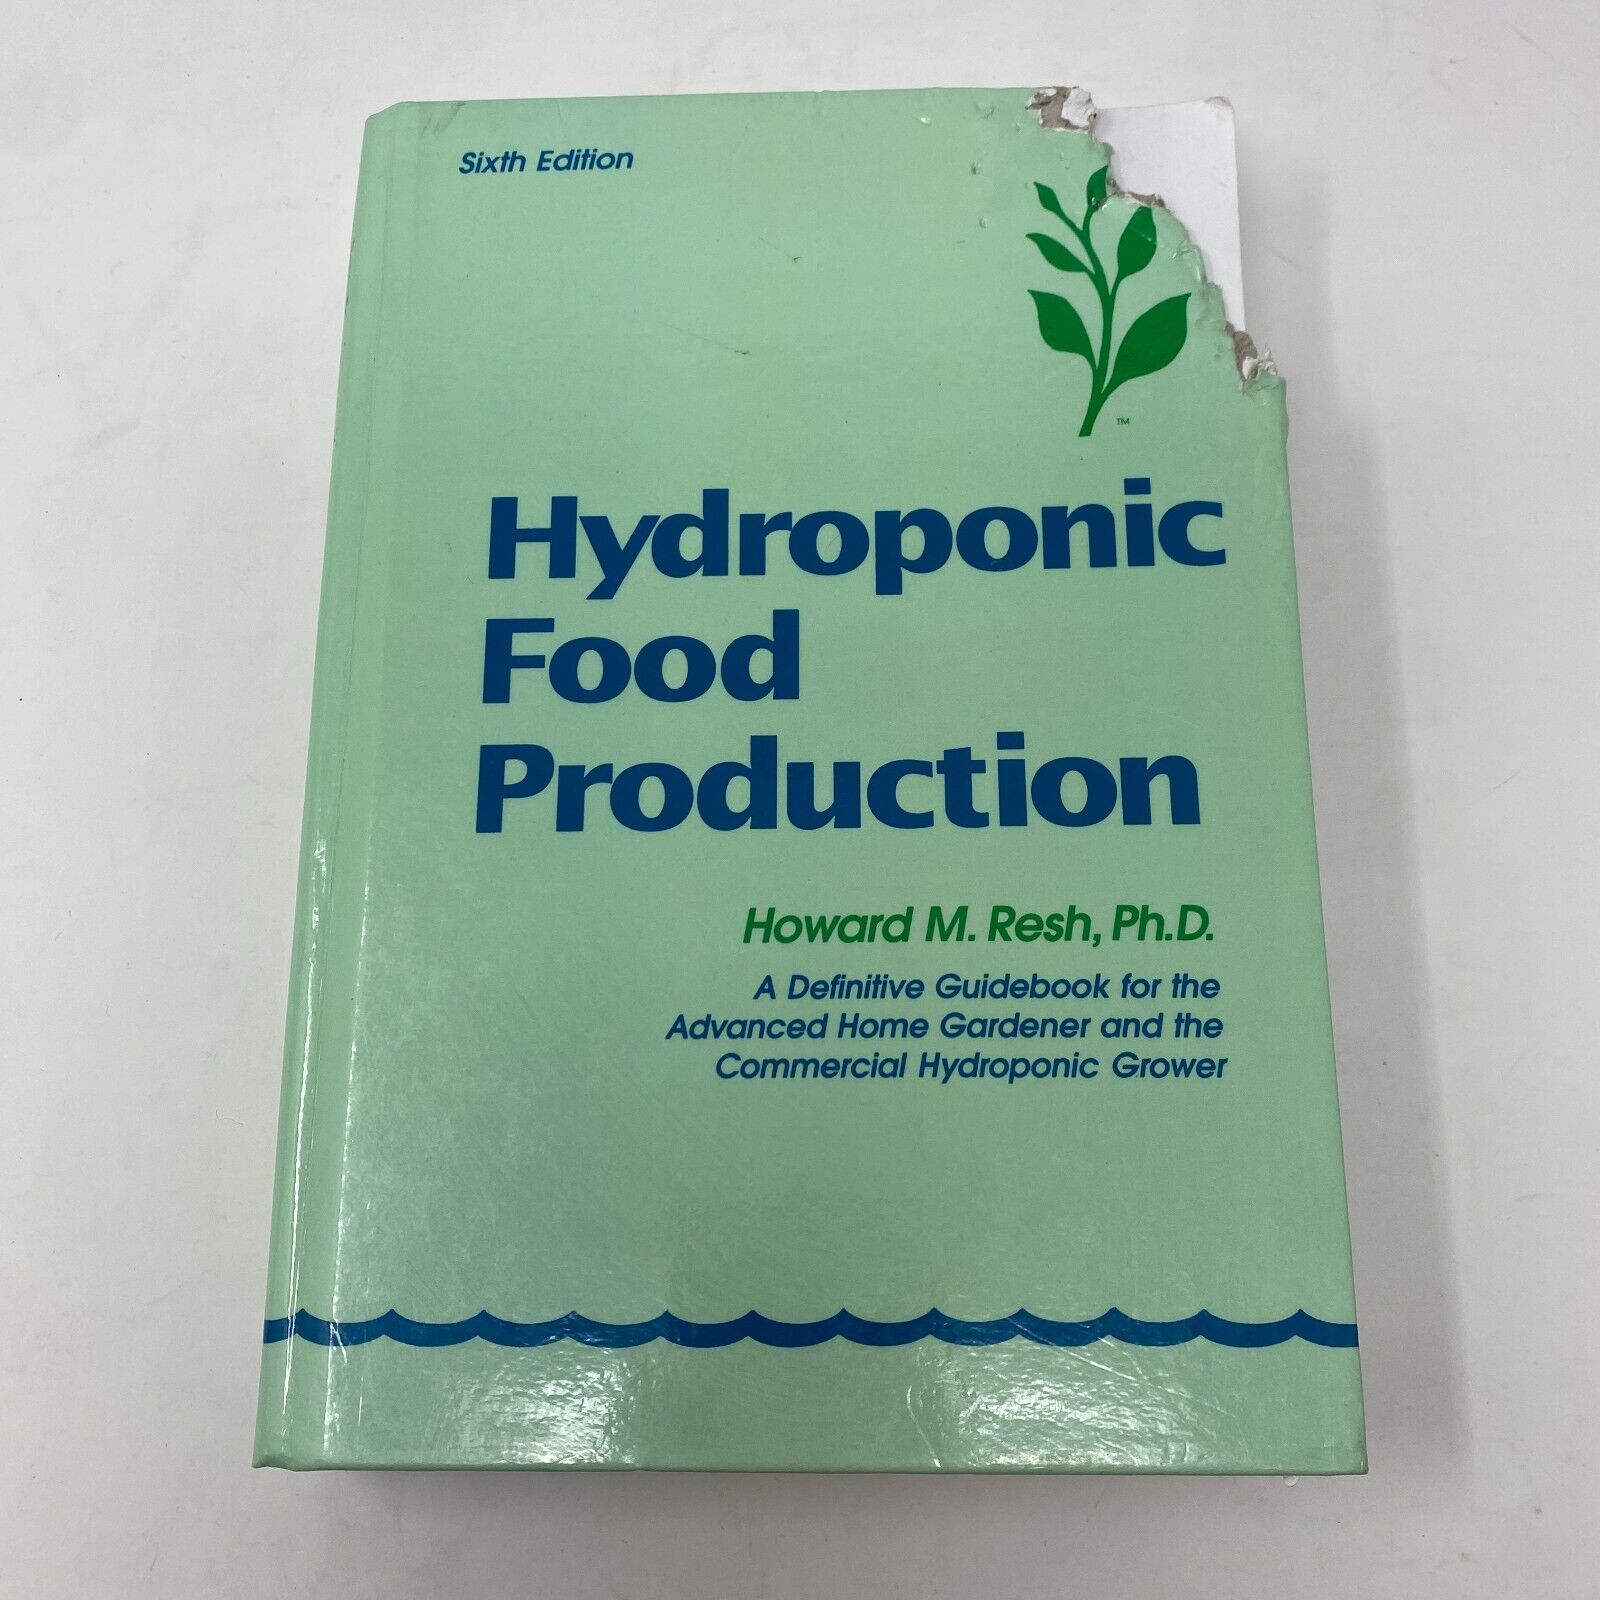 Hydroponic Food Production A Definitive Guidebook for the Advanced Home Gardener